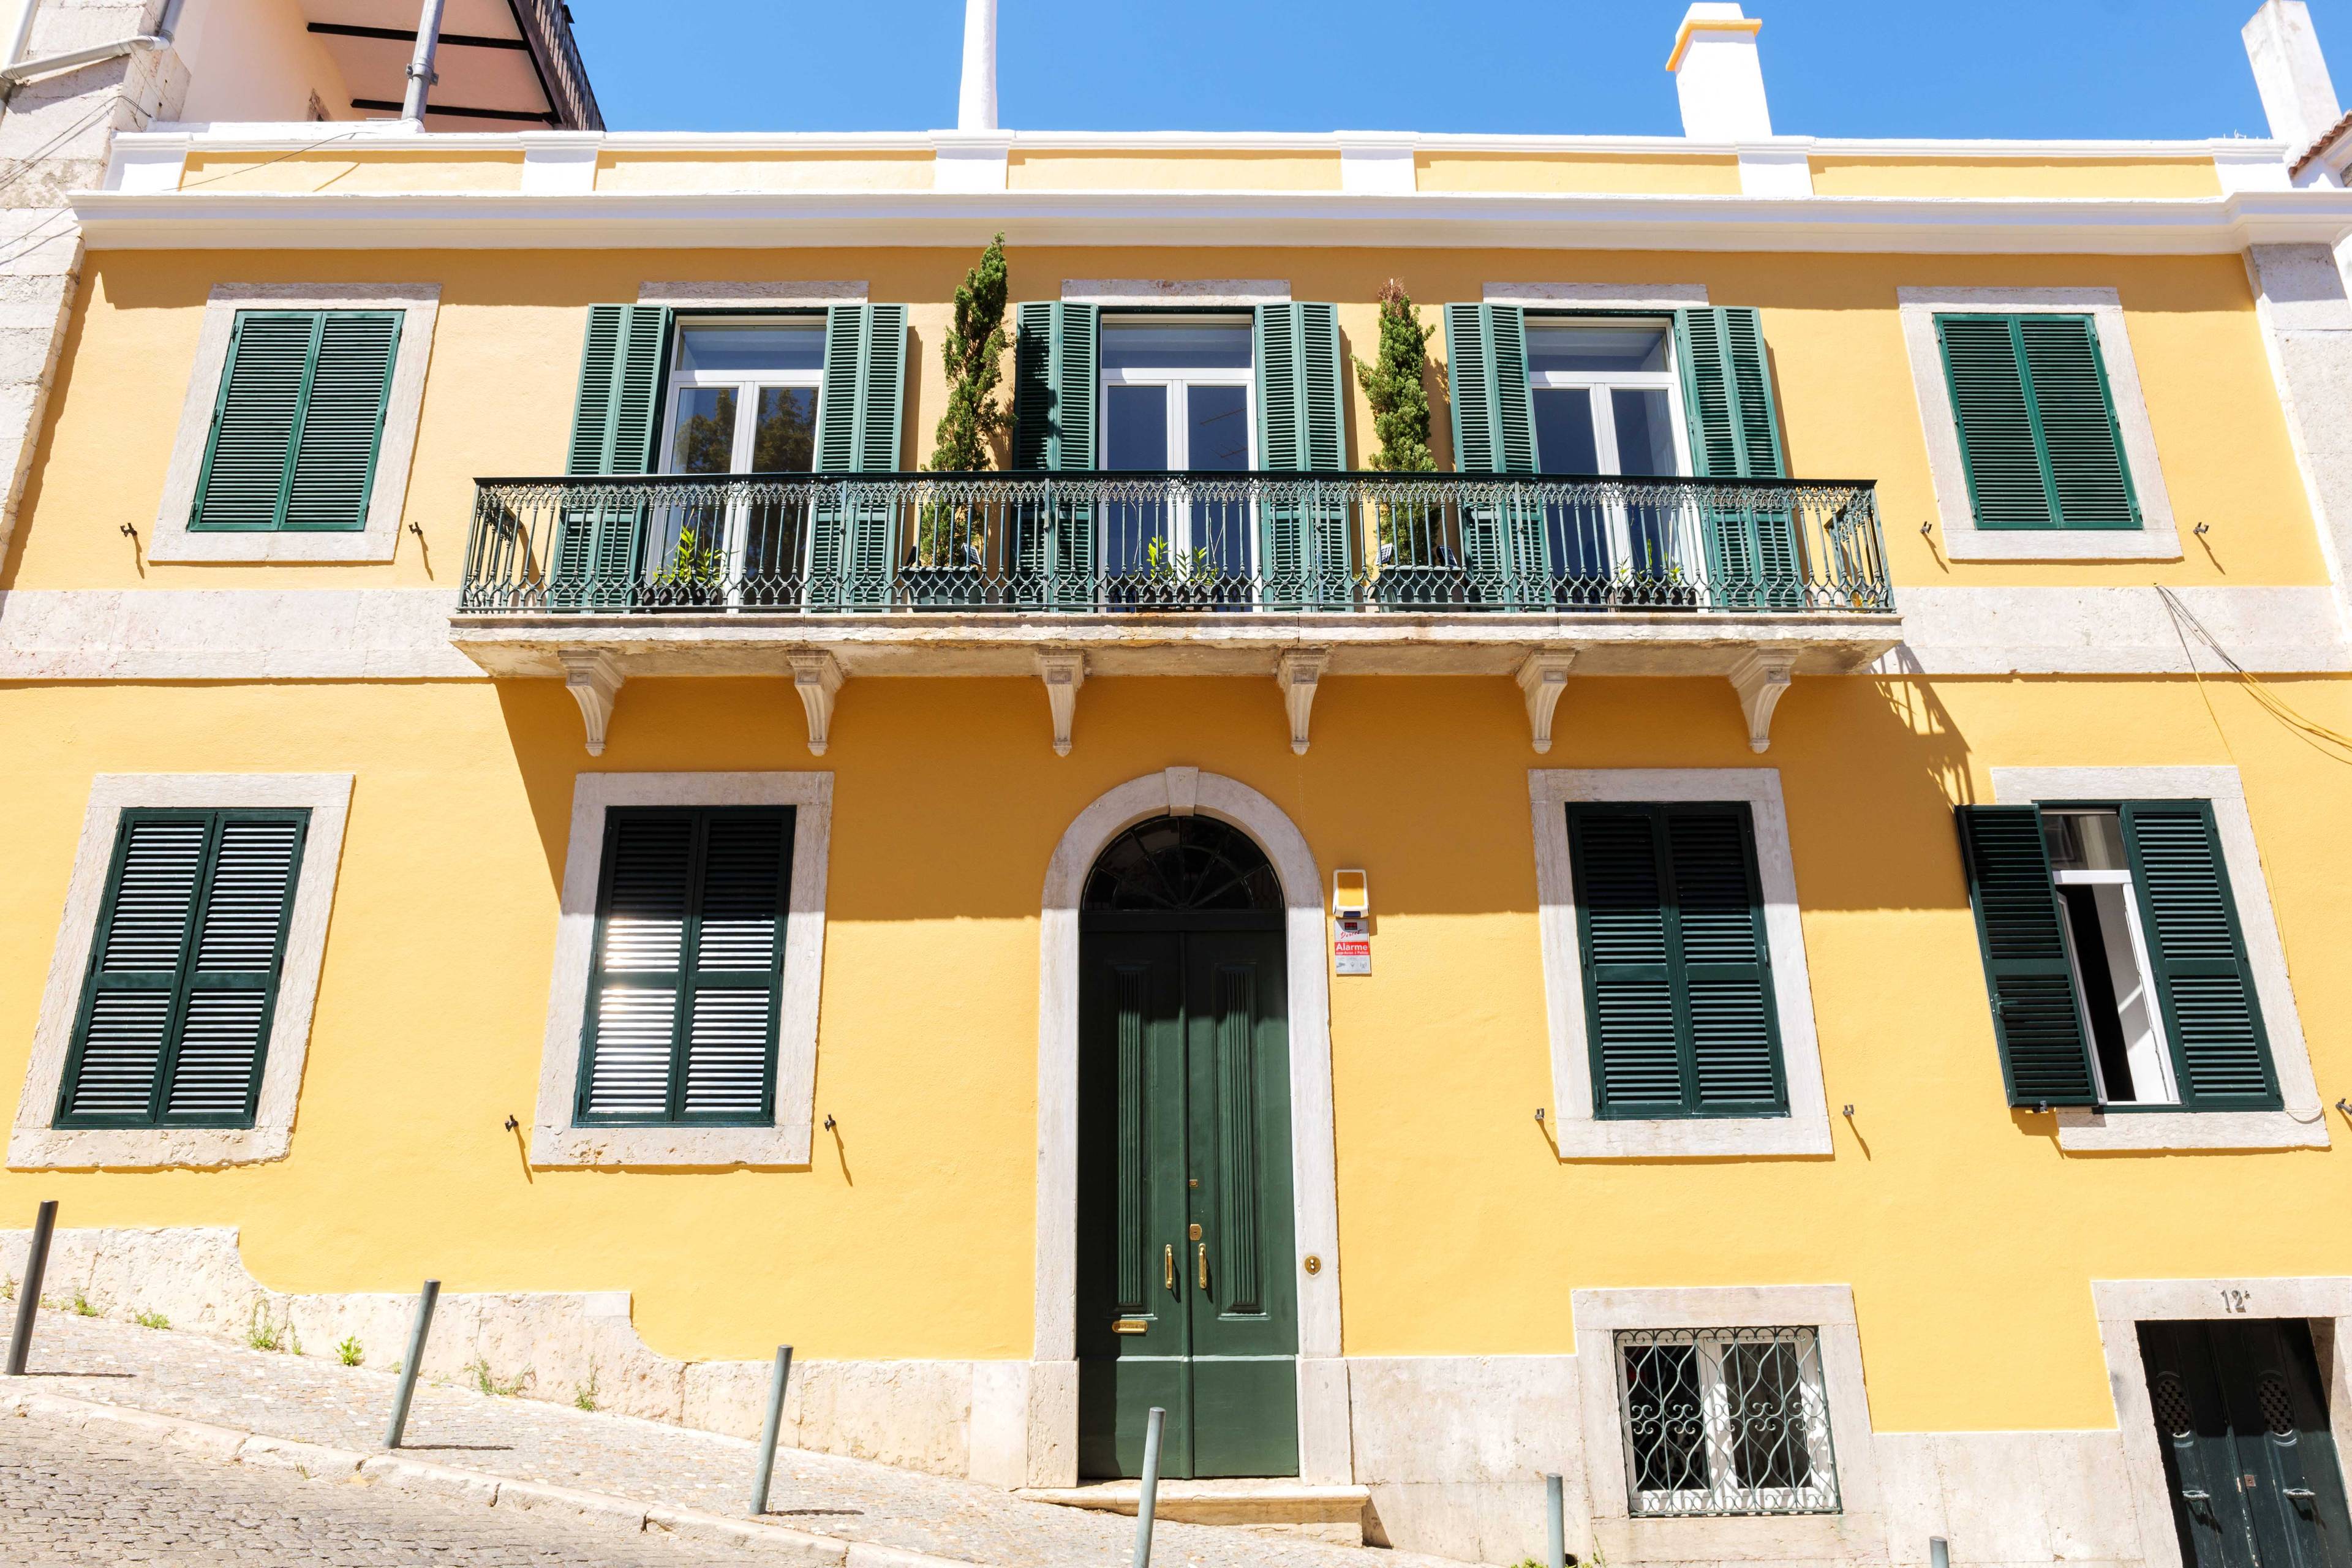 9 Bedroom Villa situated in the heart of Chiado, Lisbon